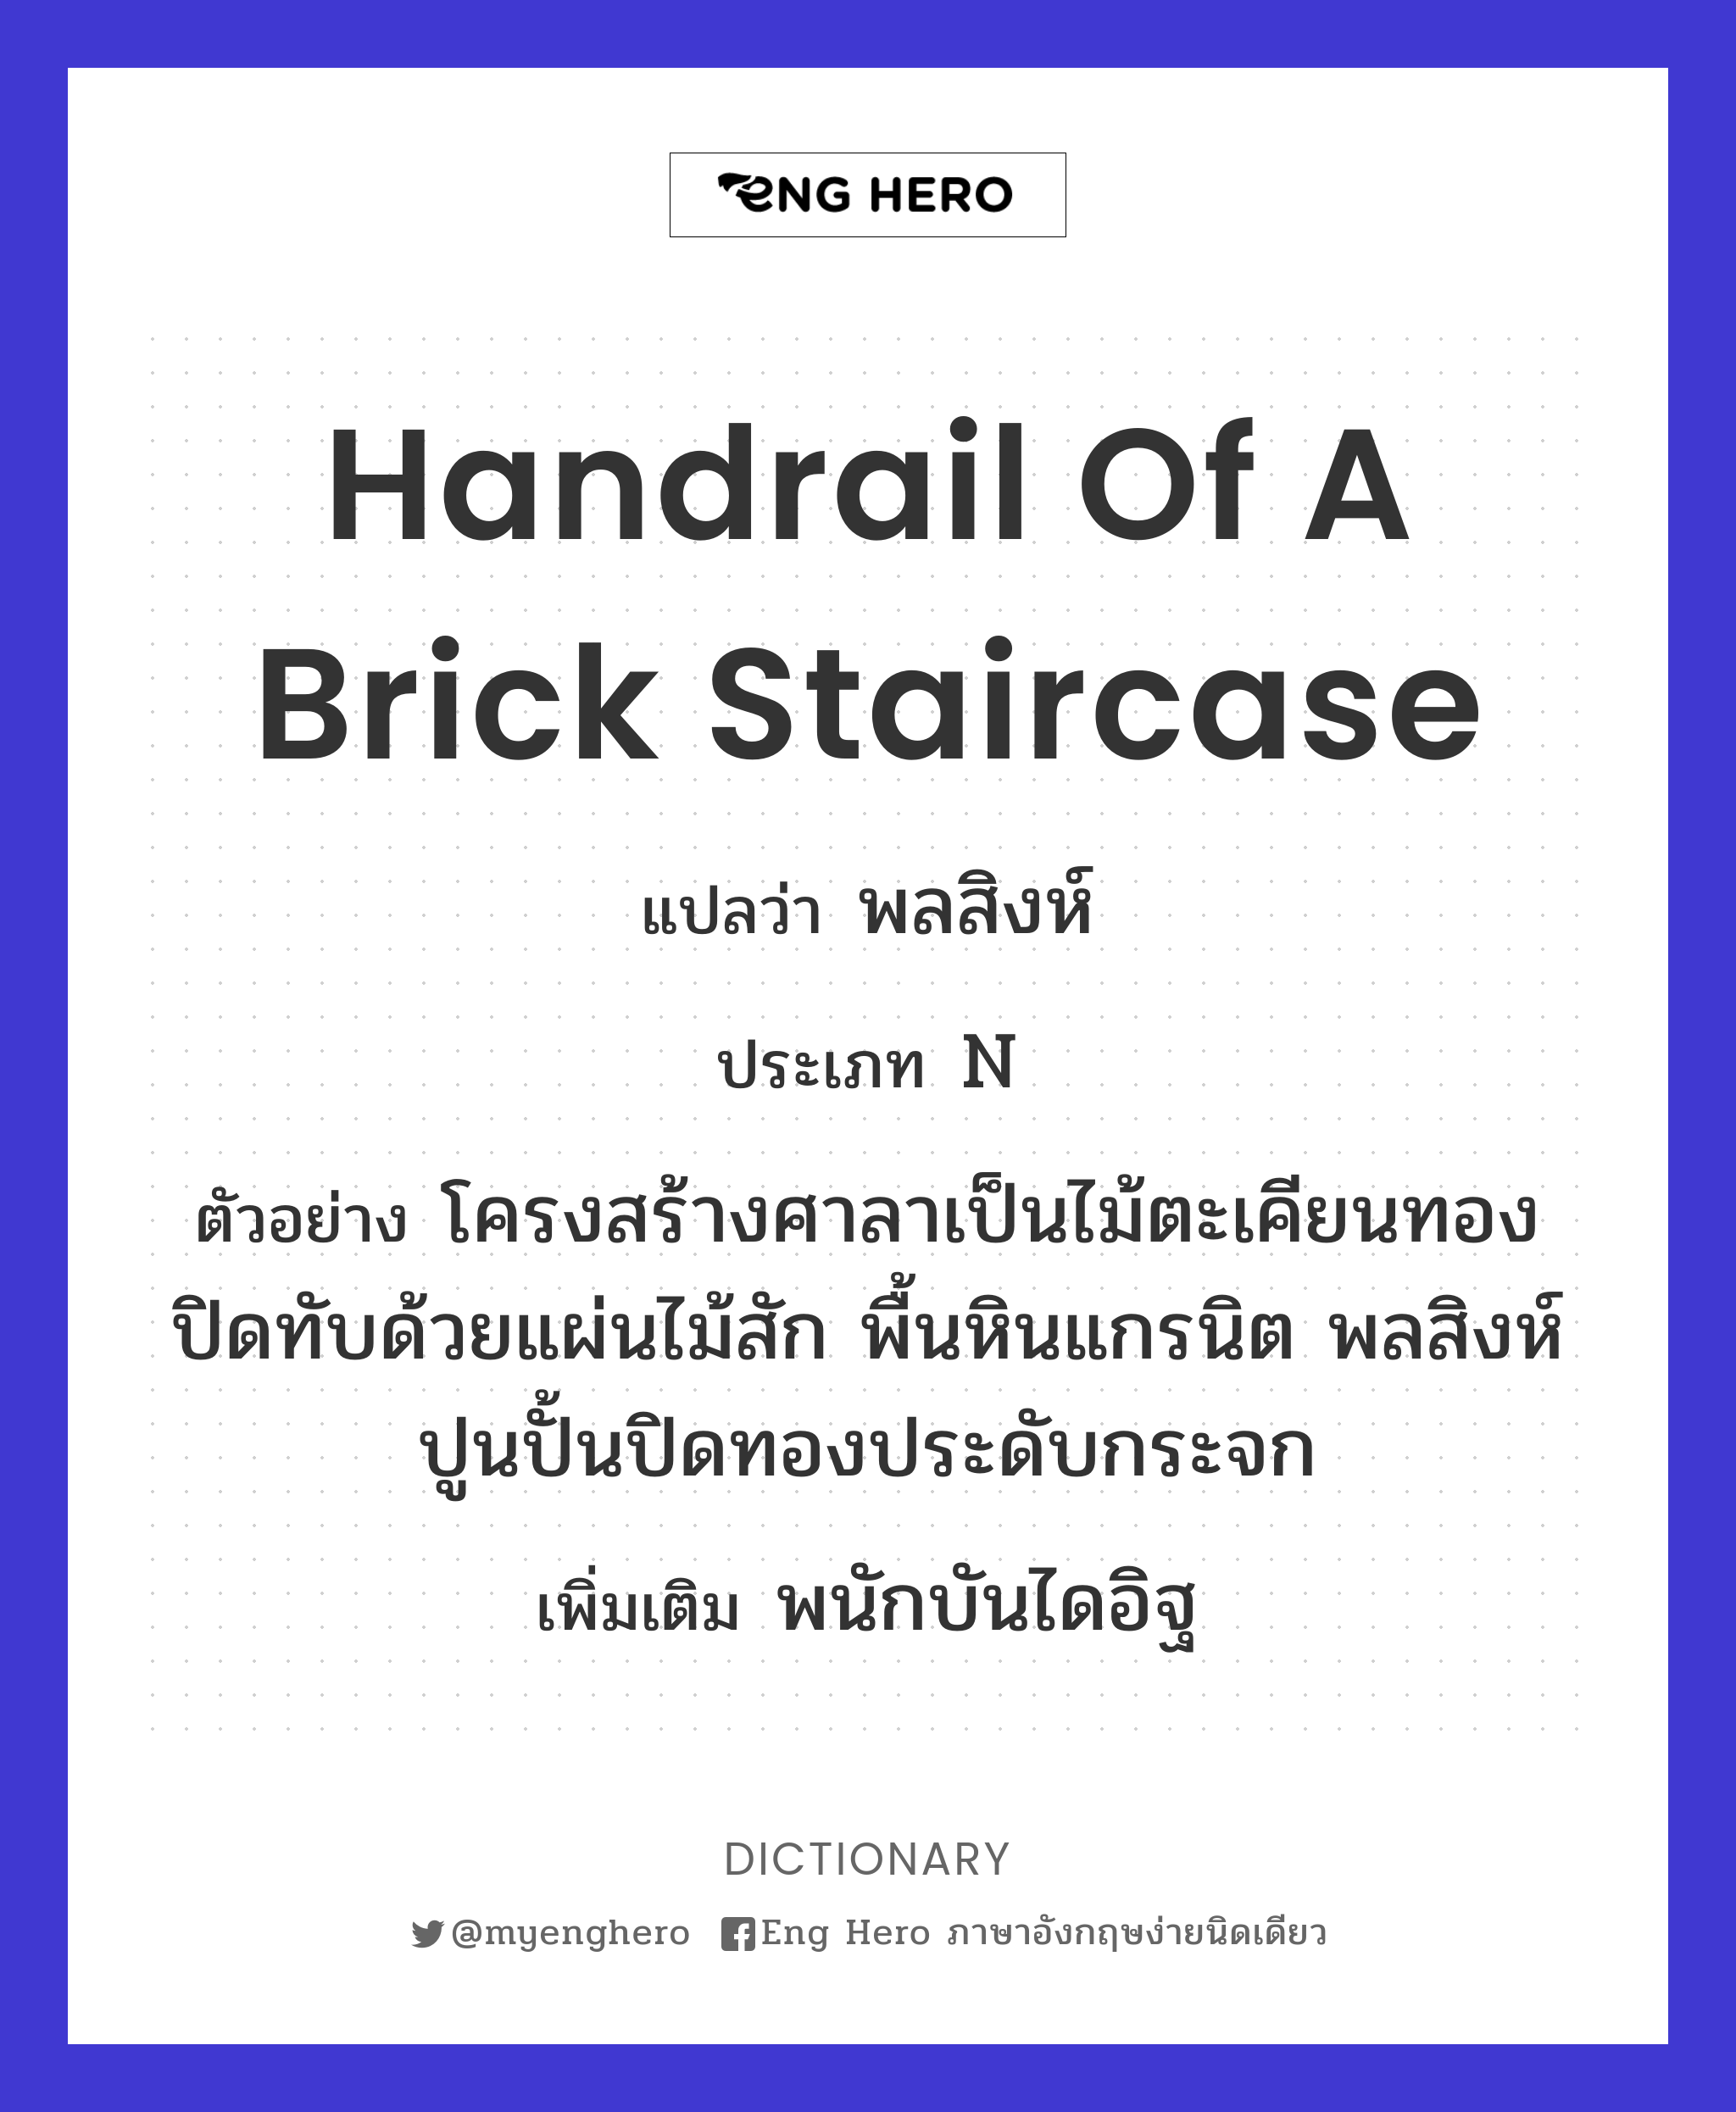 handrail of a brick staircase